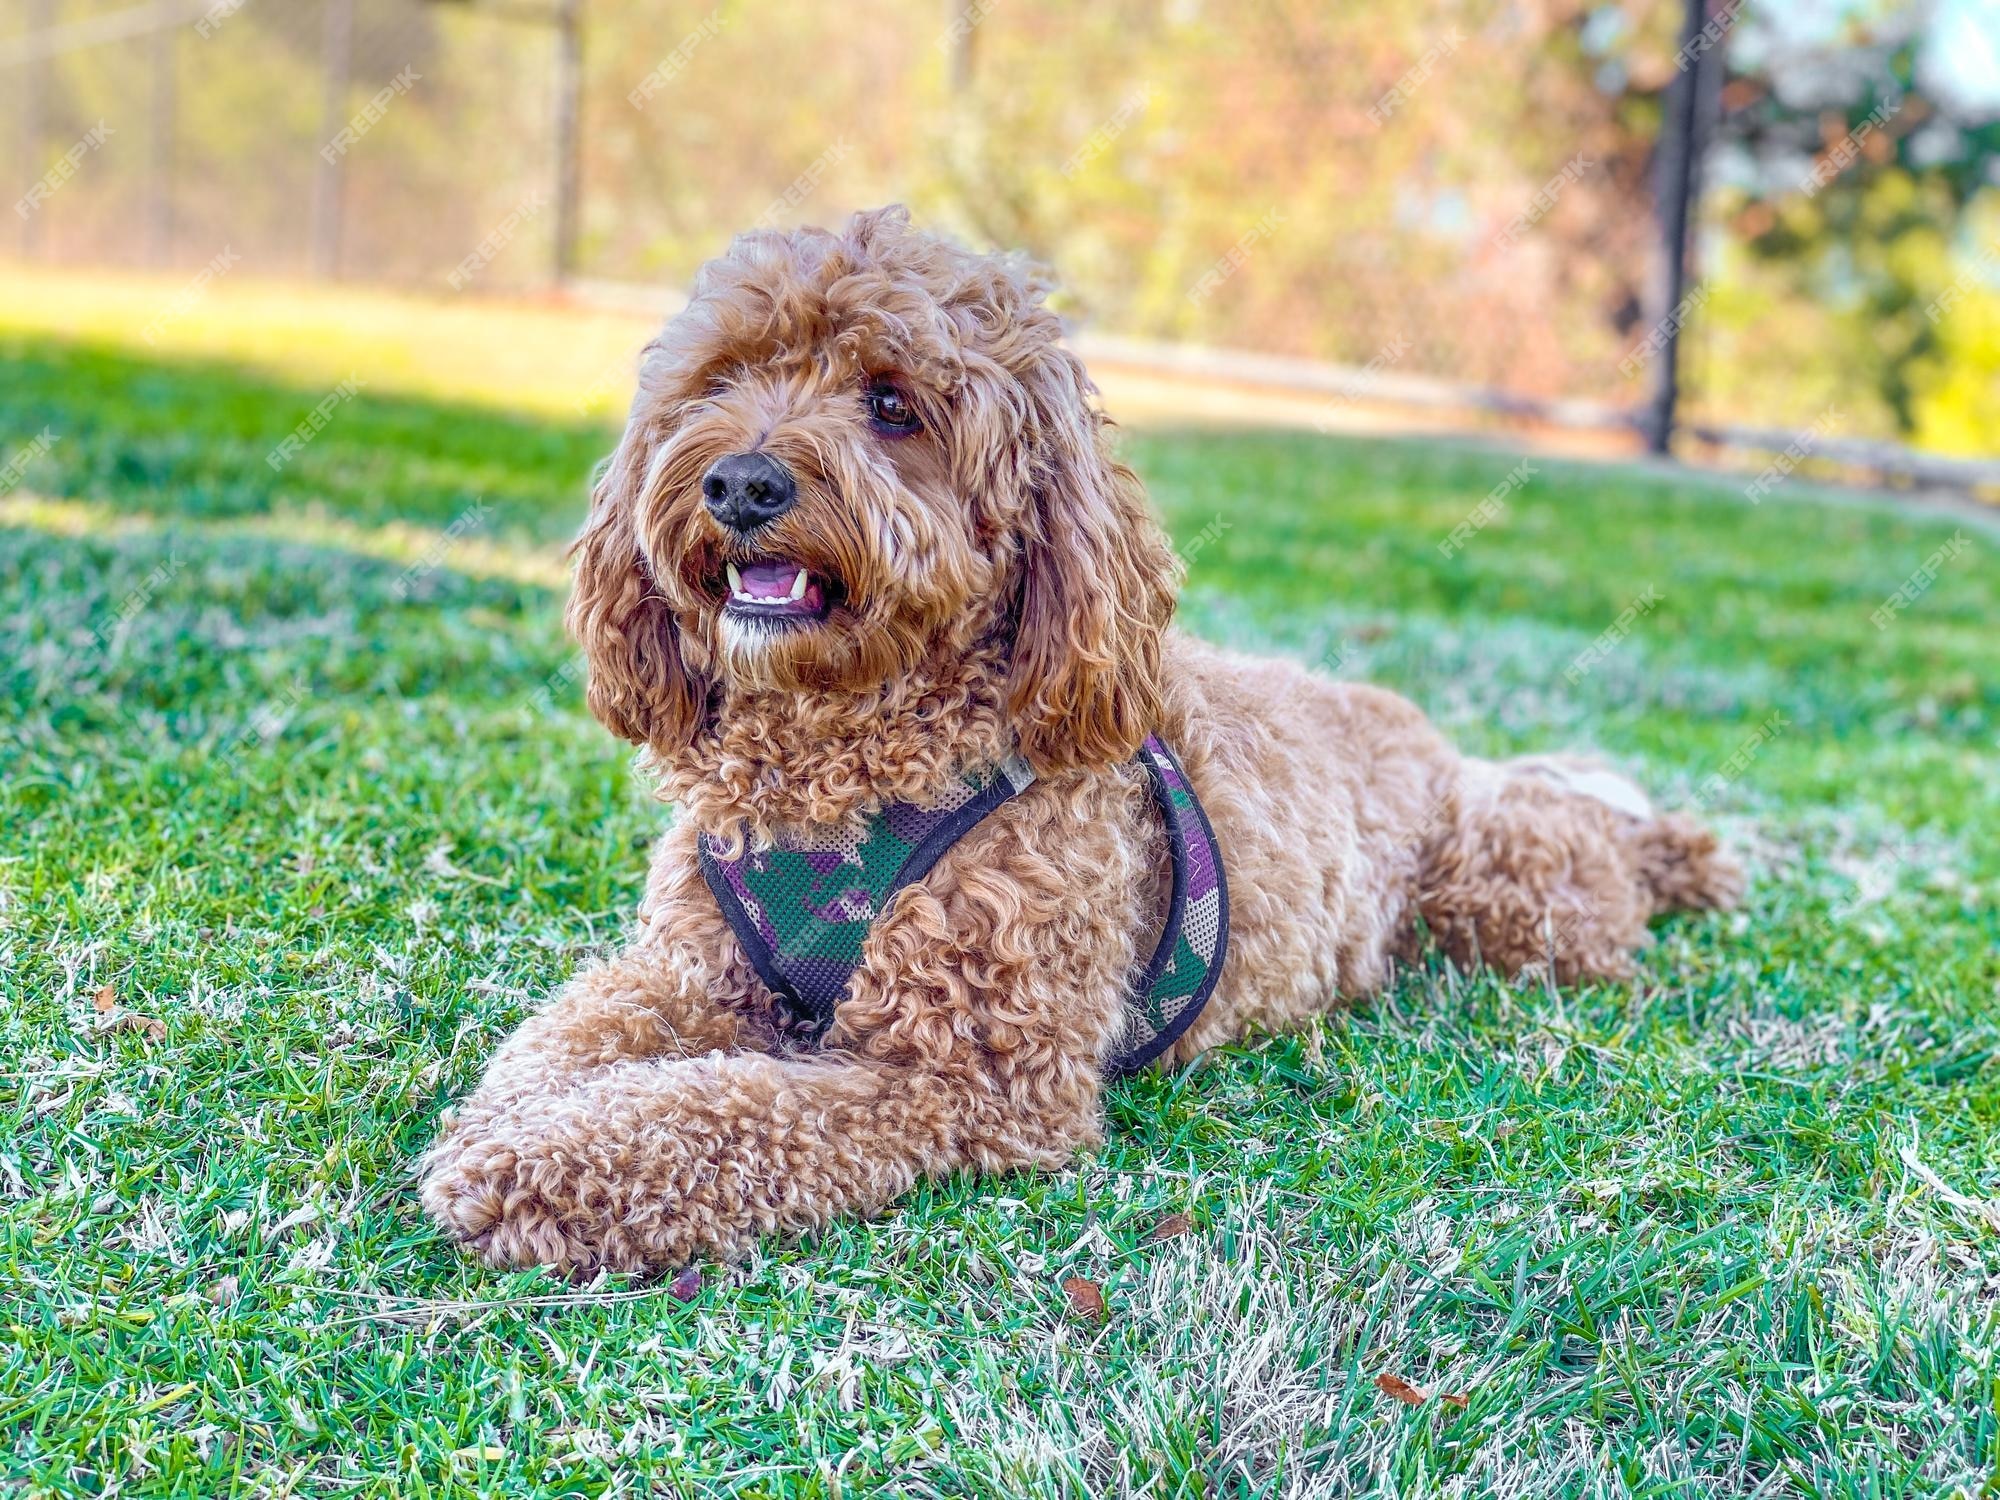 Premium Photo | dog in the park mixed breed cavalier king charles spaniel and poodle